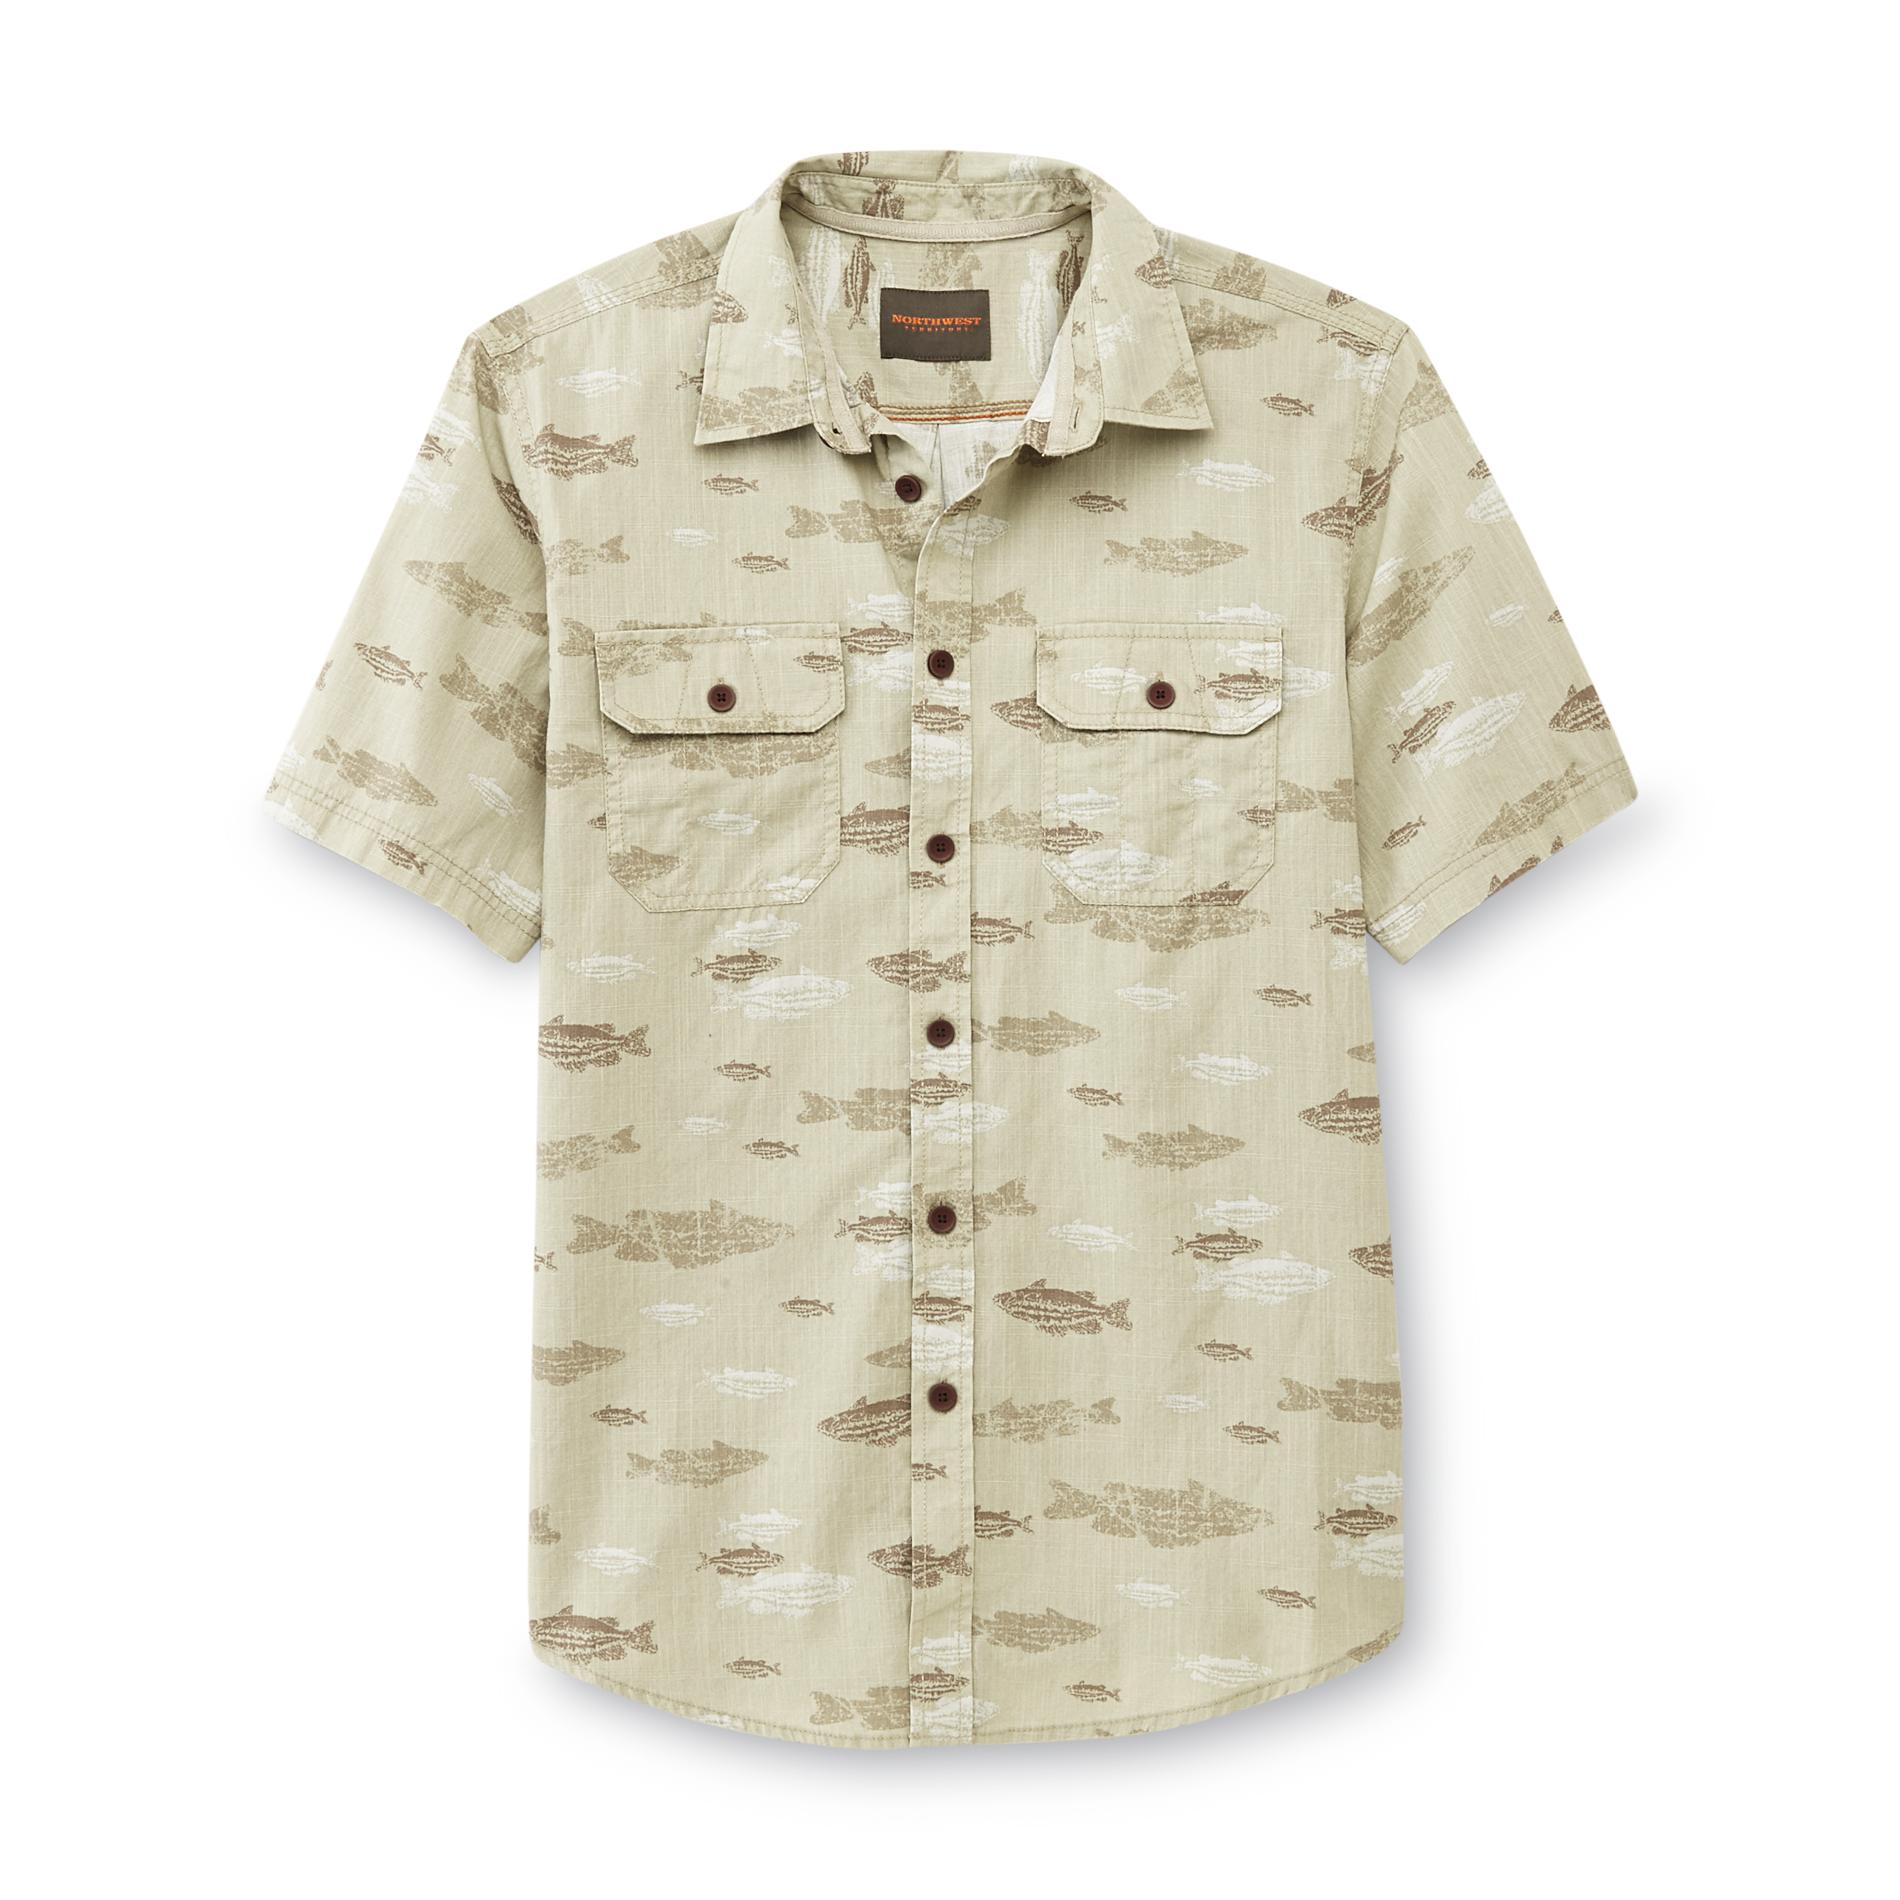 Northwest Territory Men's Big & Tall Button-Front Shirt - Fish